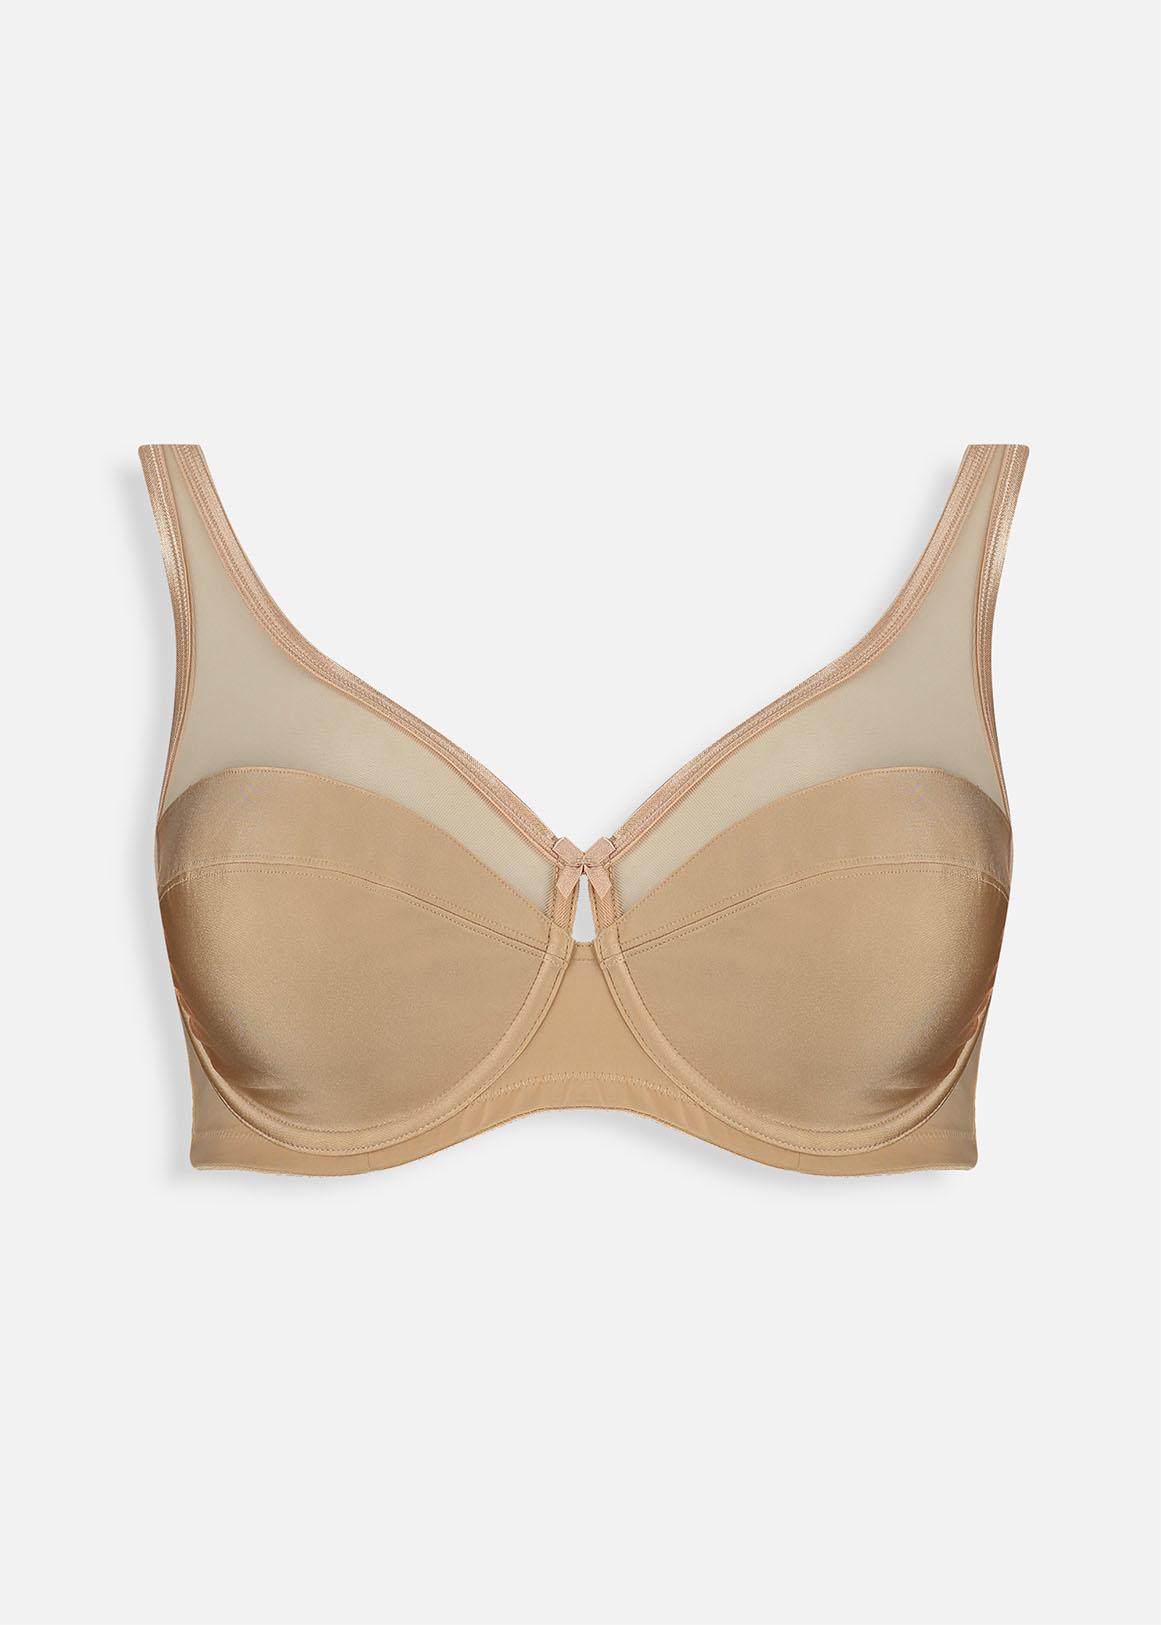 D cup size underwired breathable bra Brand Binnys DM FOR QUERIES